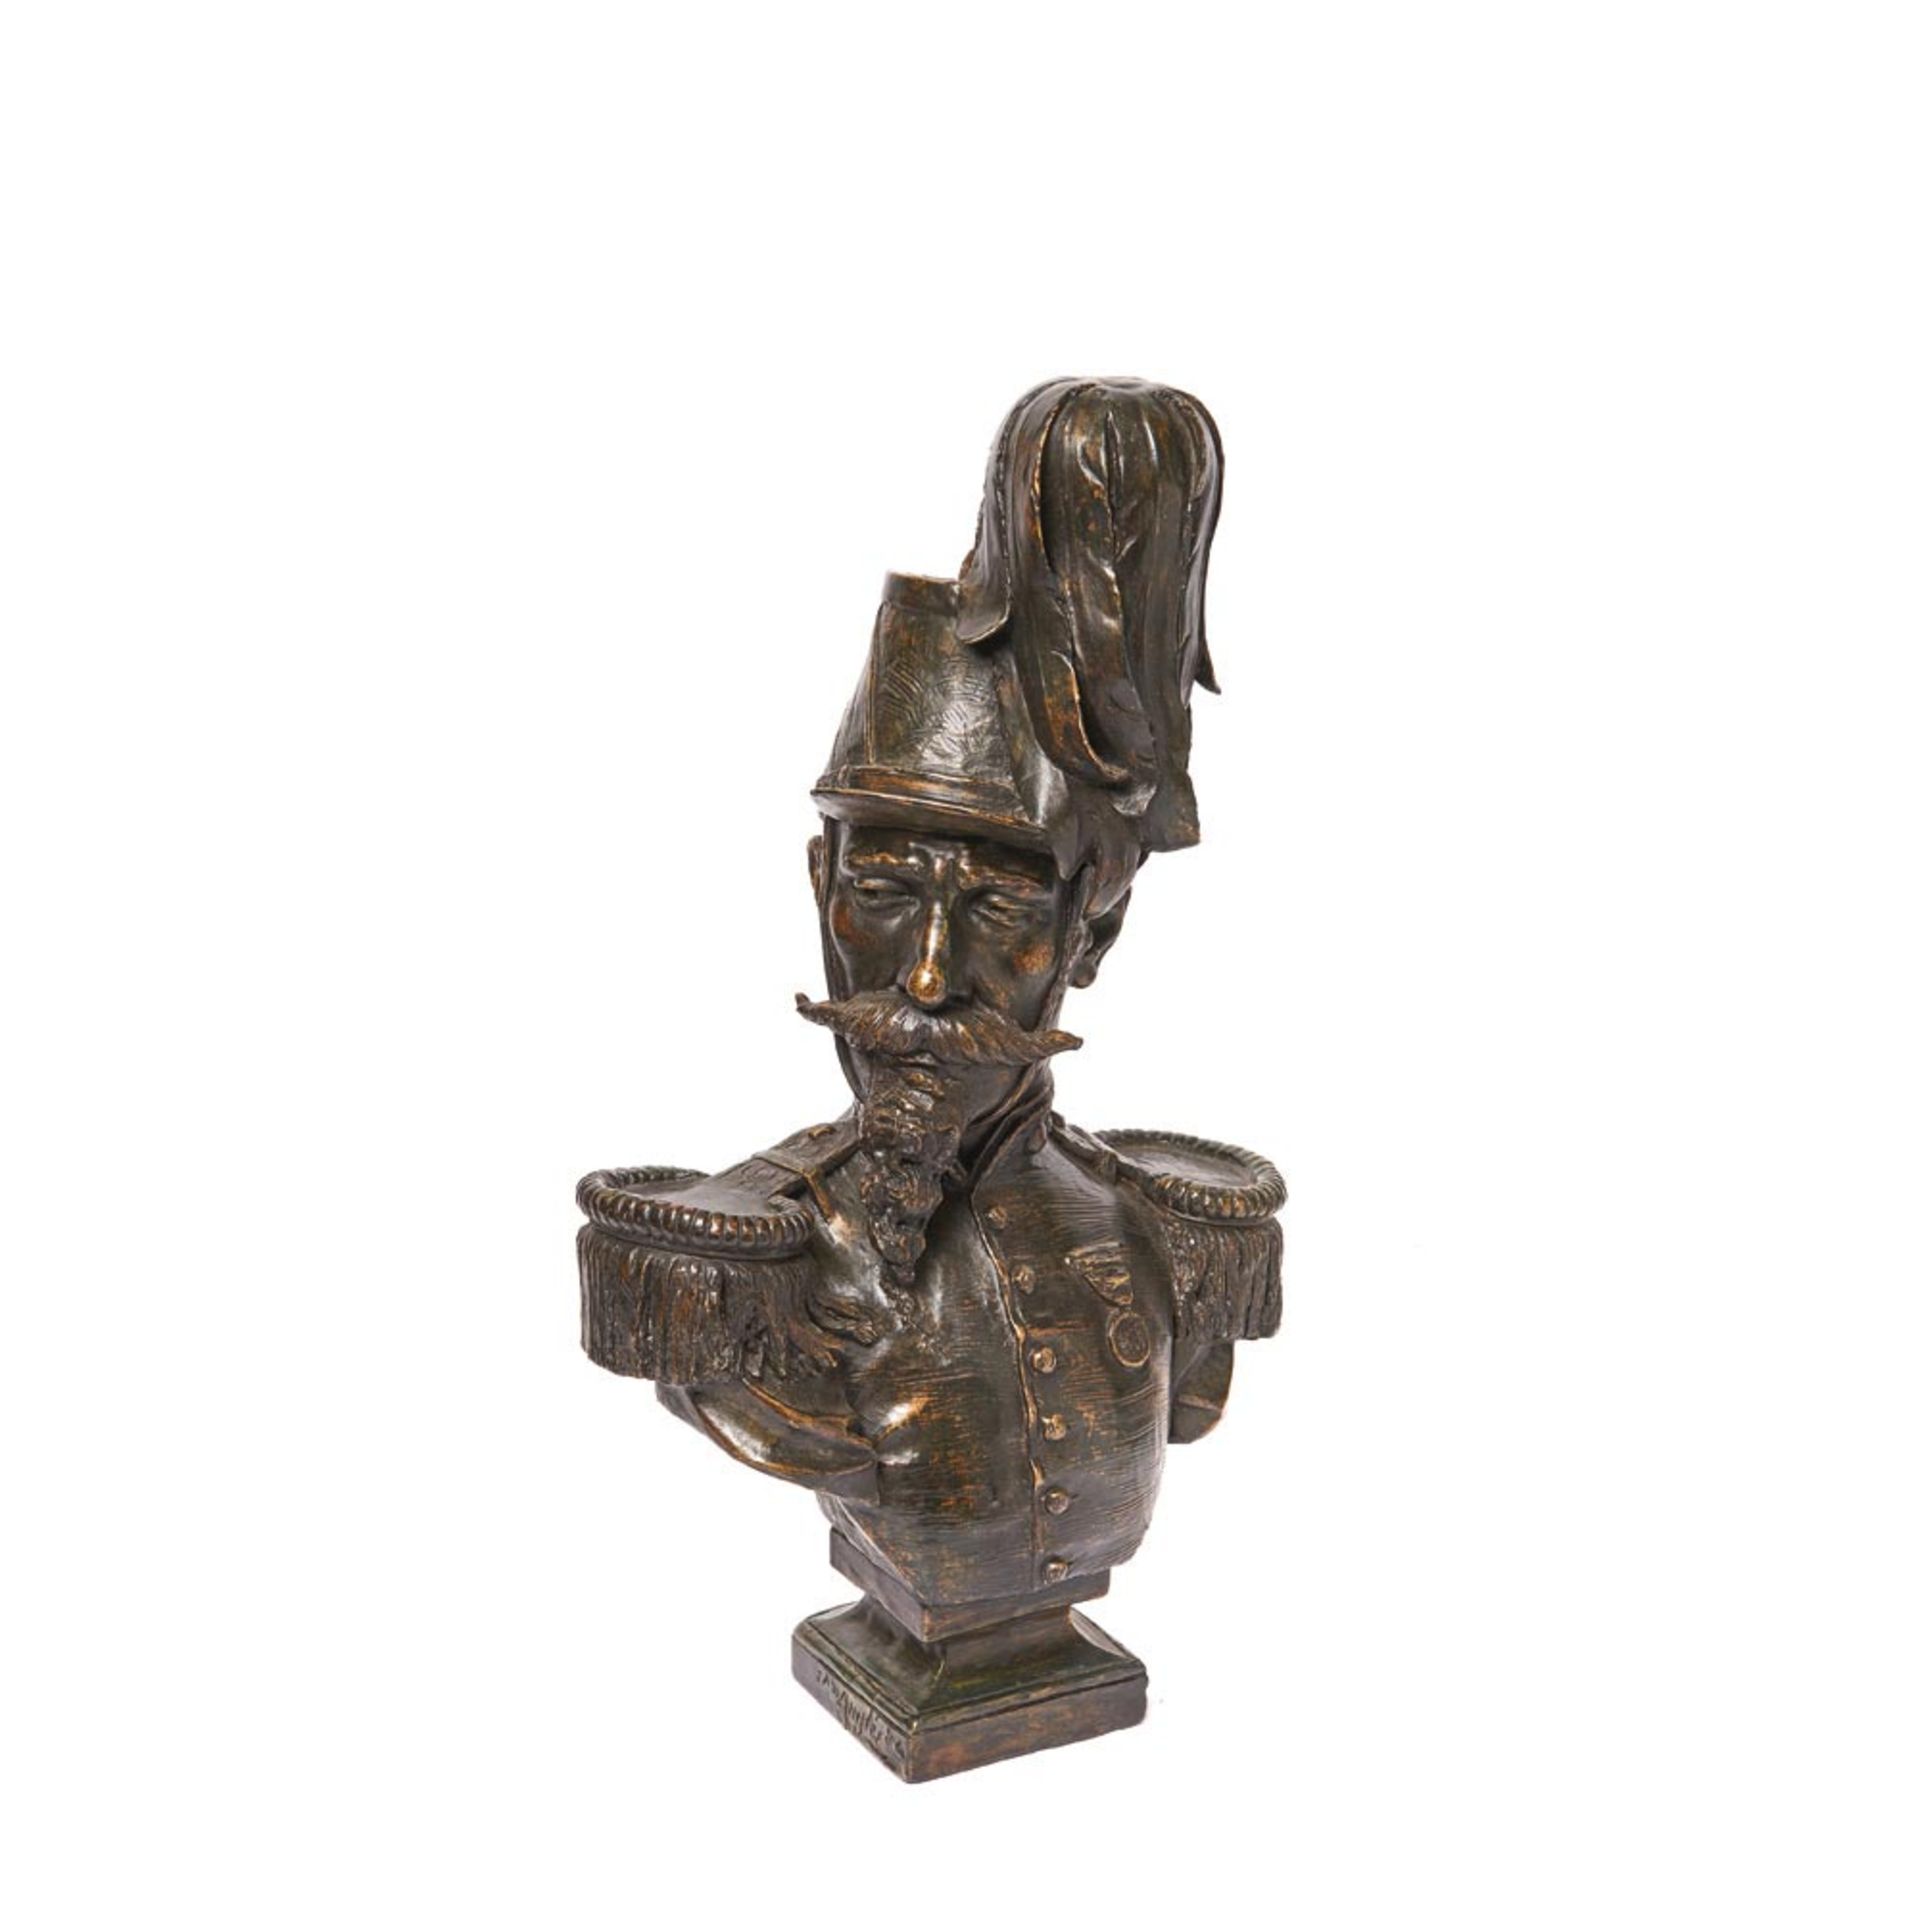 European patinated terracotta officer sculpture, late 19th century